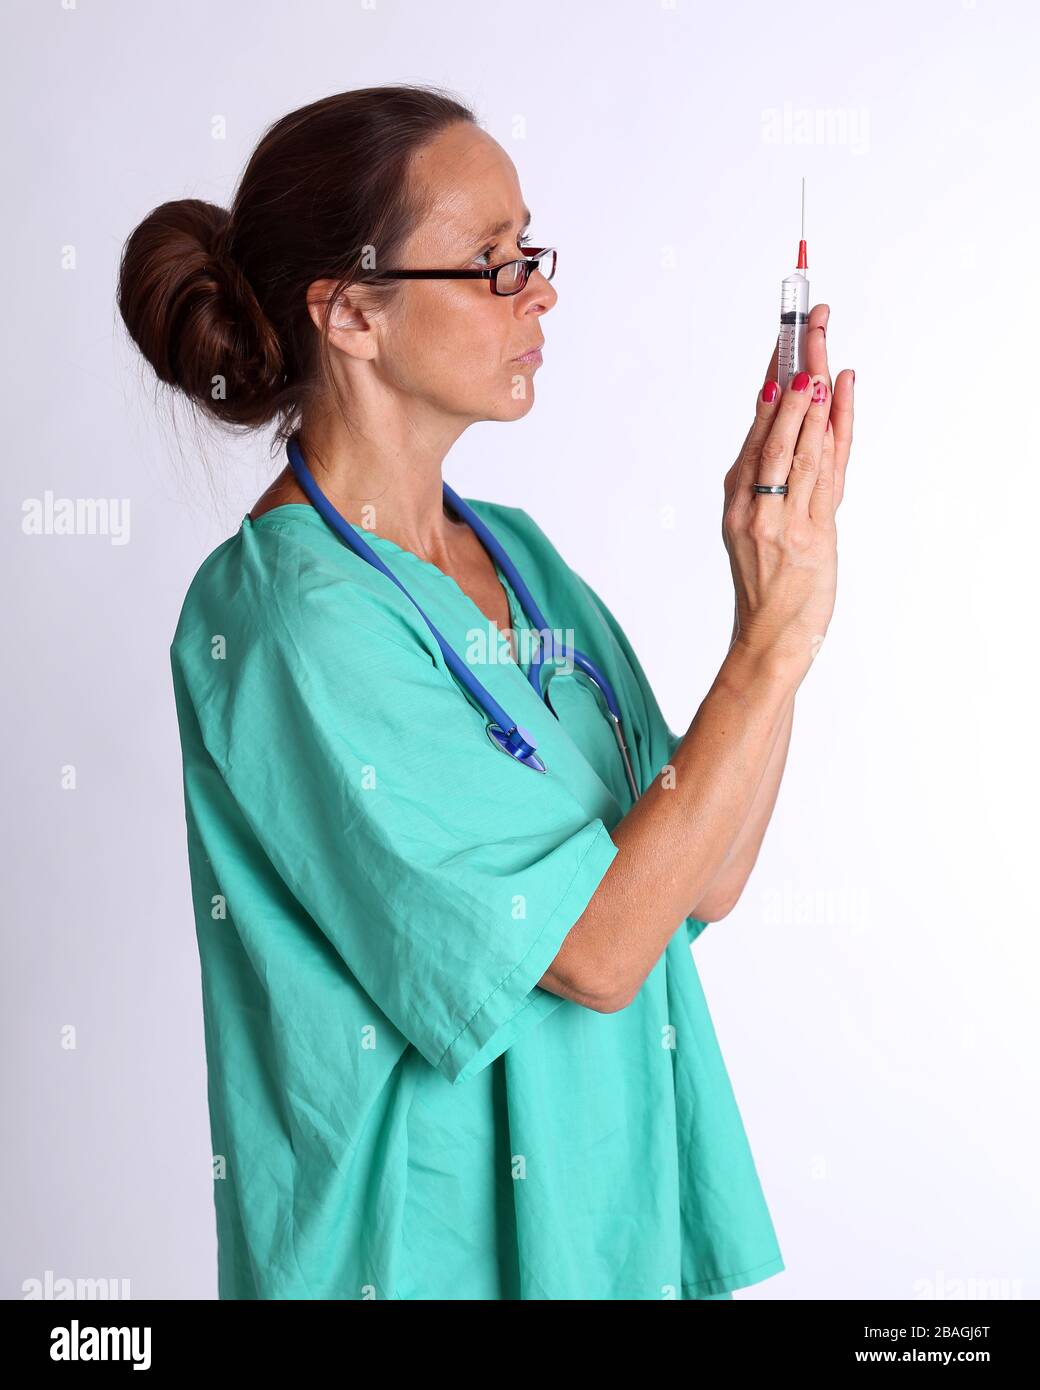 August 2015 - Older lady doctor returning to duty to serve too assist with the treatment of Coronavirus patients Stock Photo